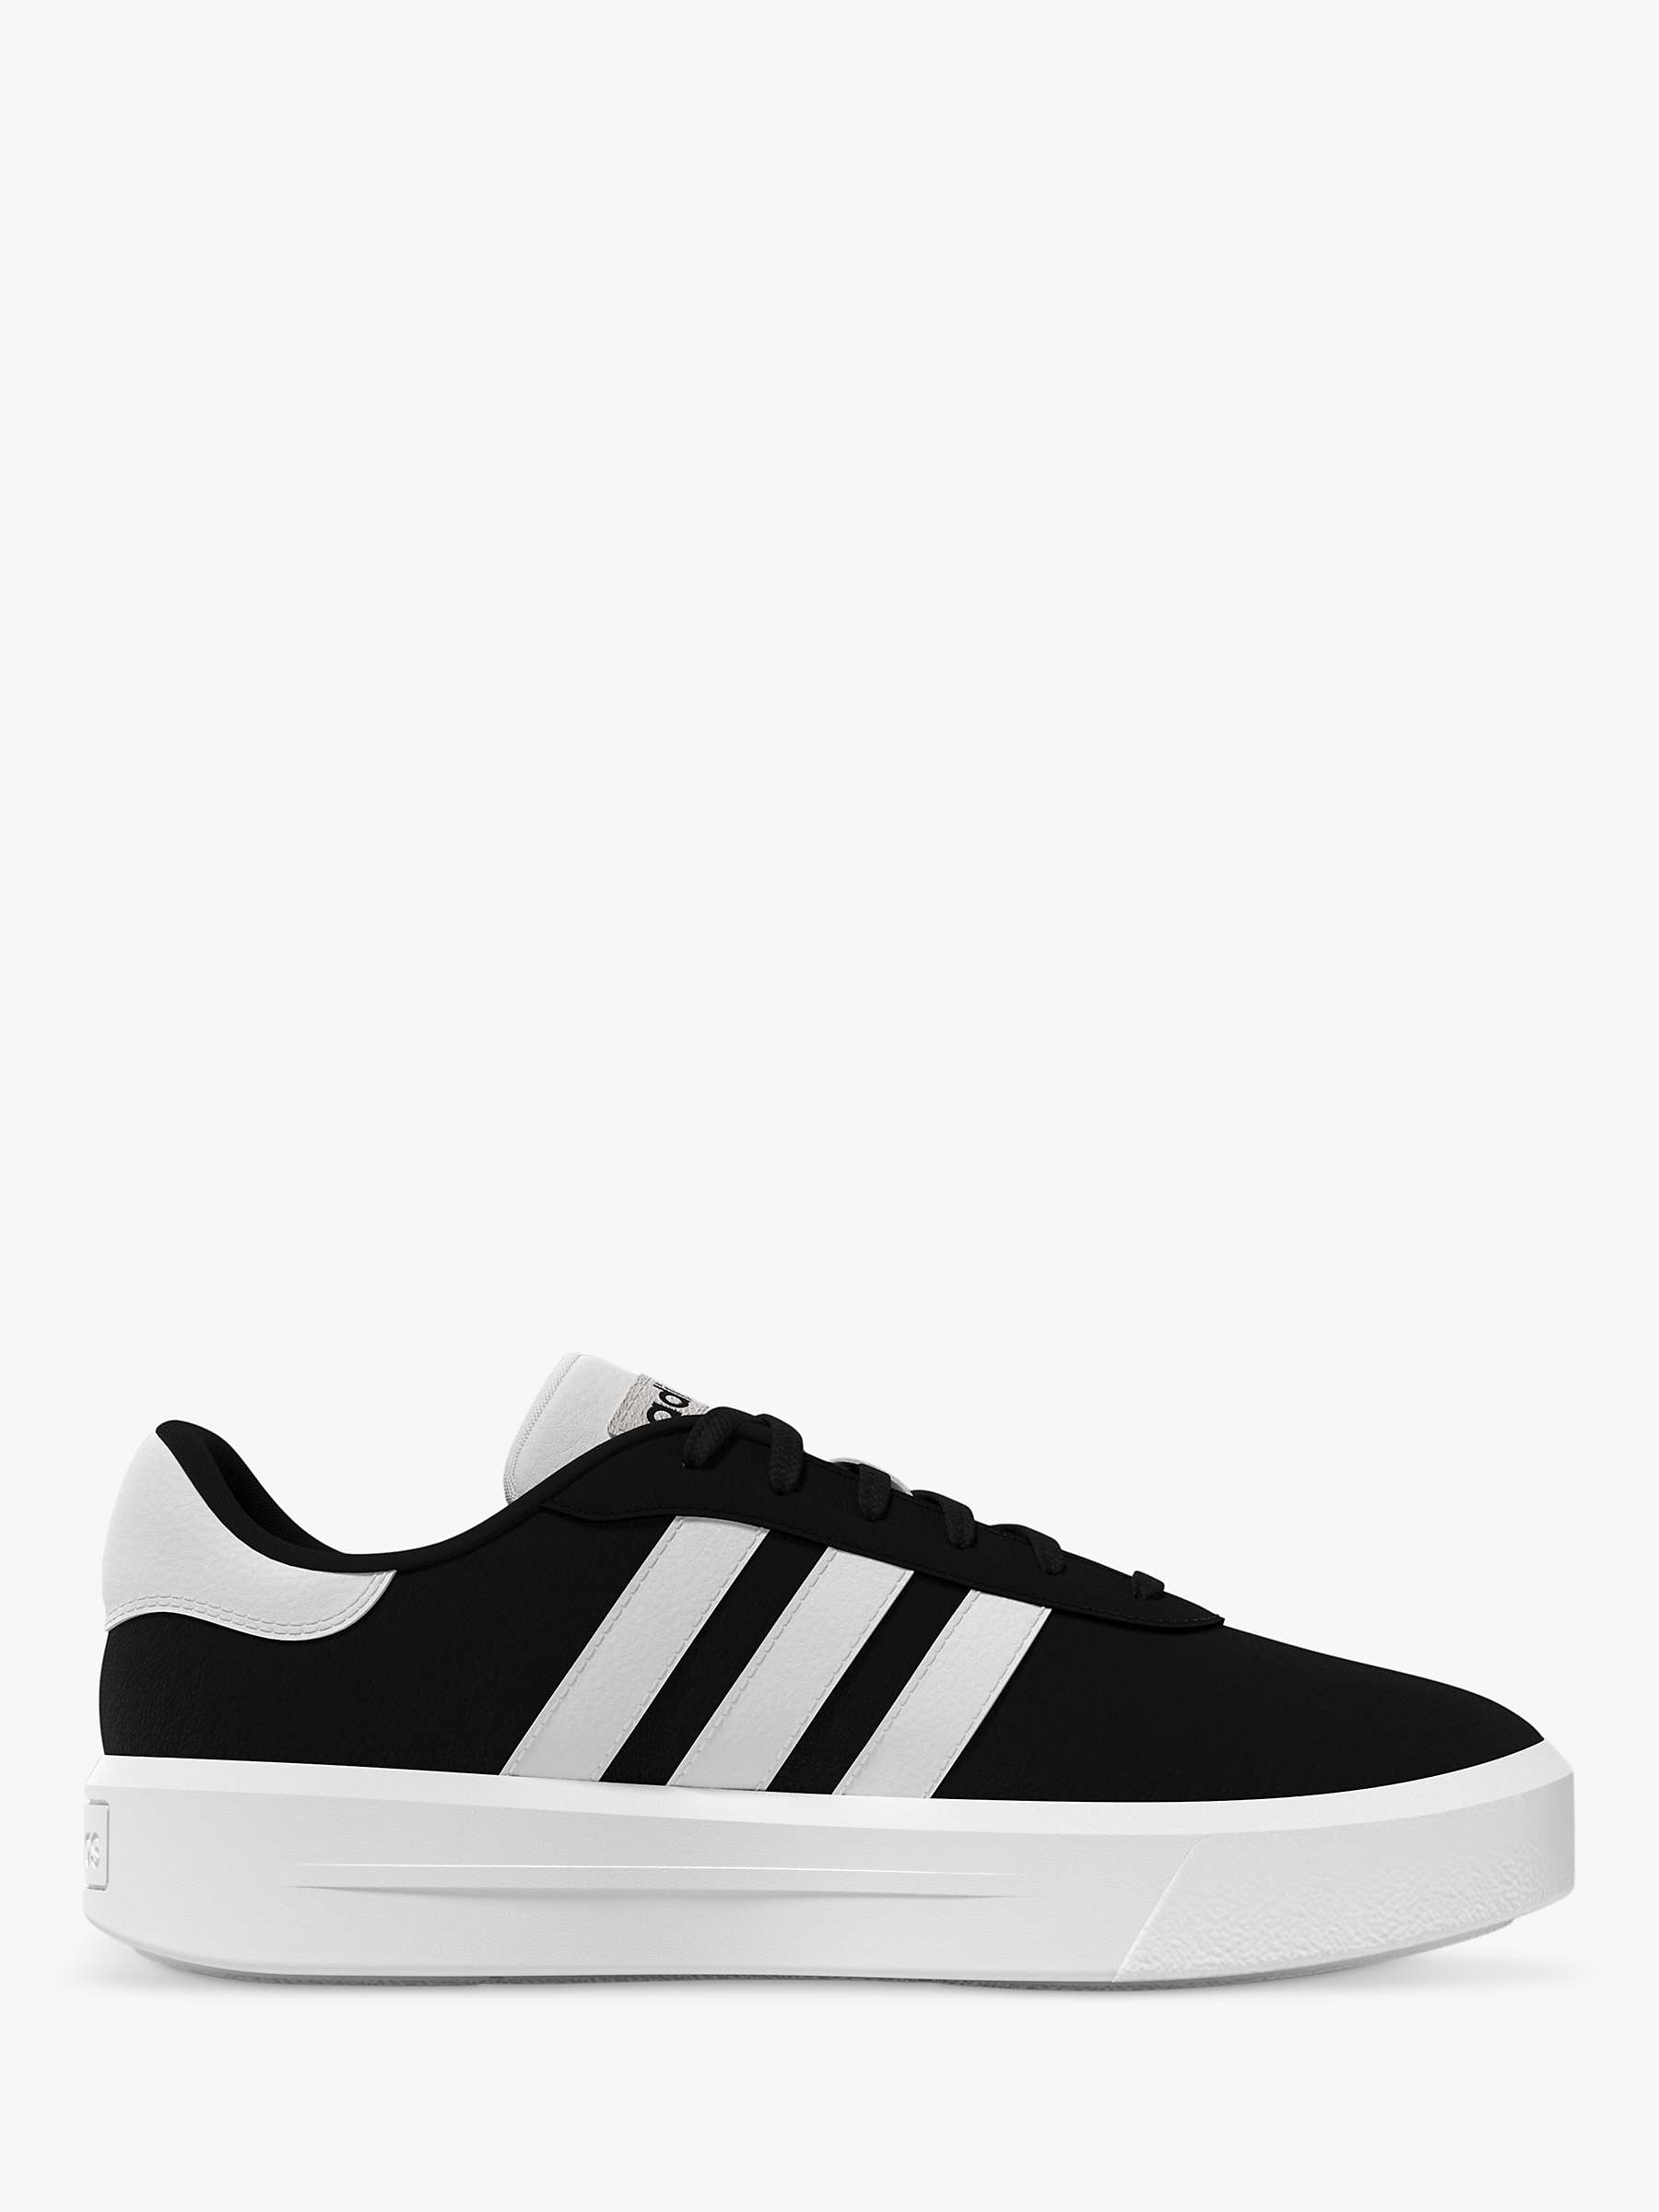 Buy adidas Court Platform Lace Up Trainers, Black/White Online at johnlewis.com